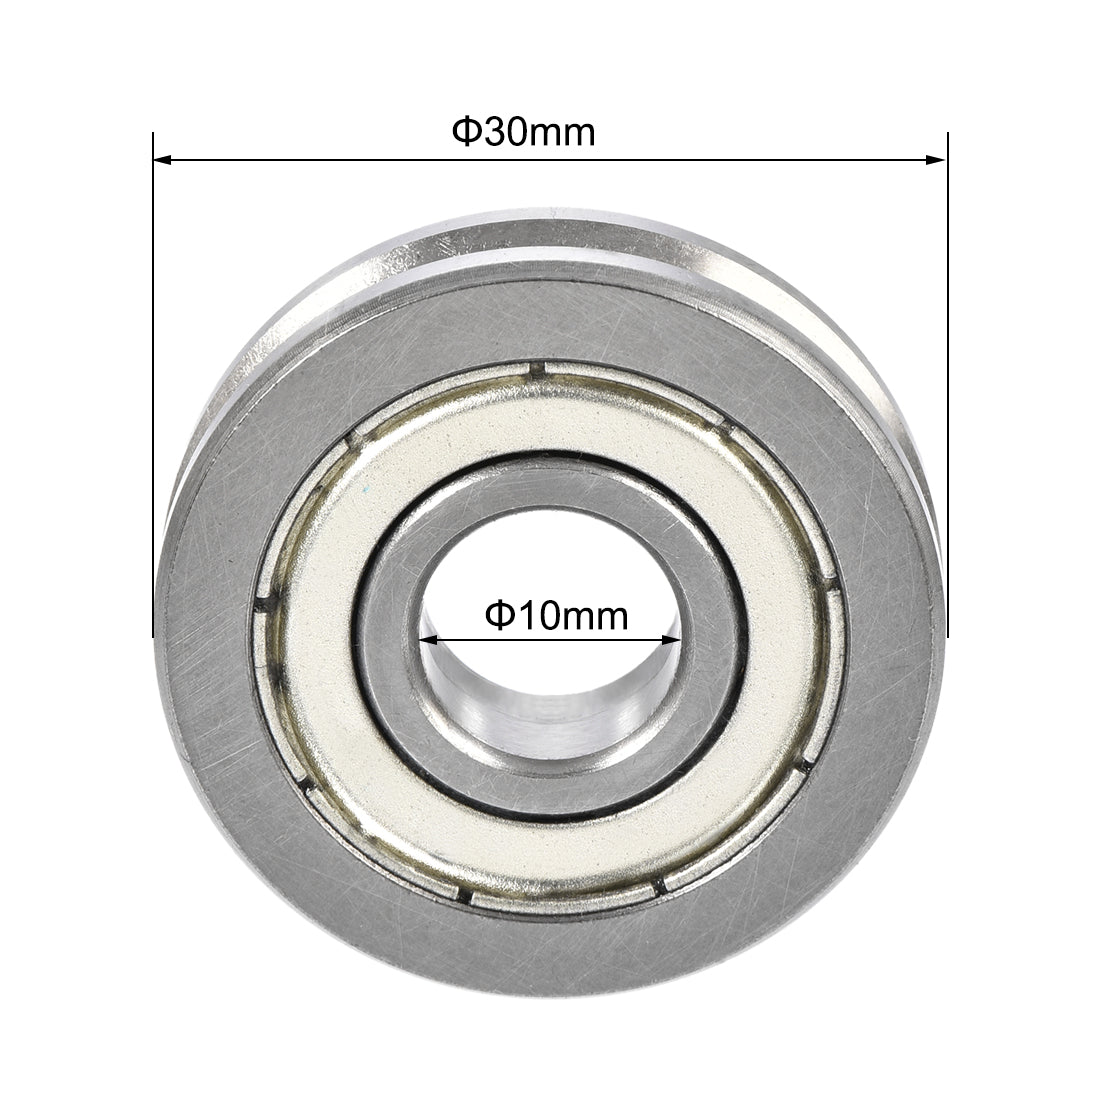 uxcell Uxcell V6000ZZ V-Groove Shaped Bearing 10mmx30mmx8mm Double Metal Shielded Bearing 2pcs